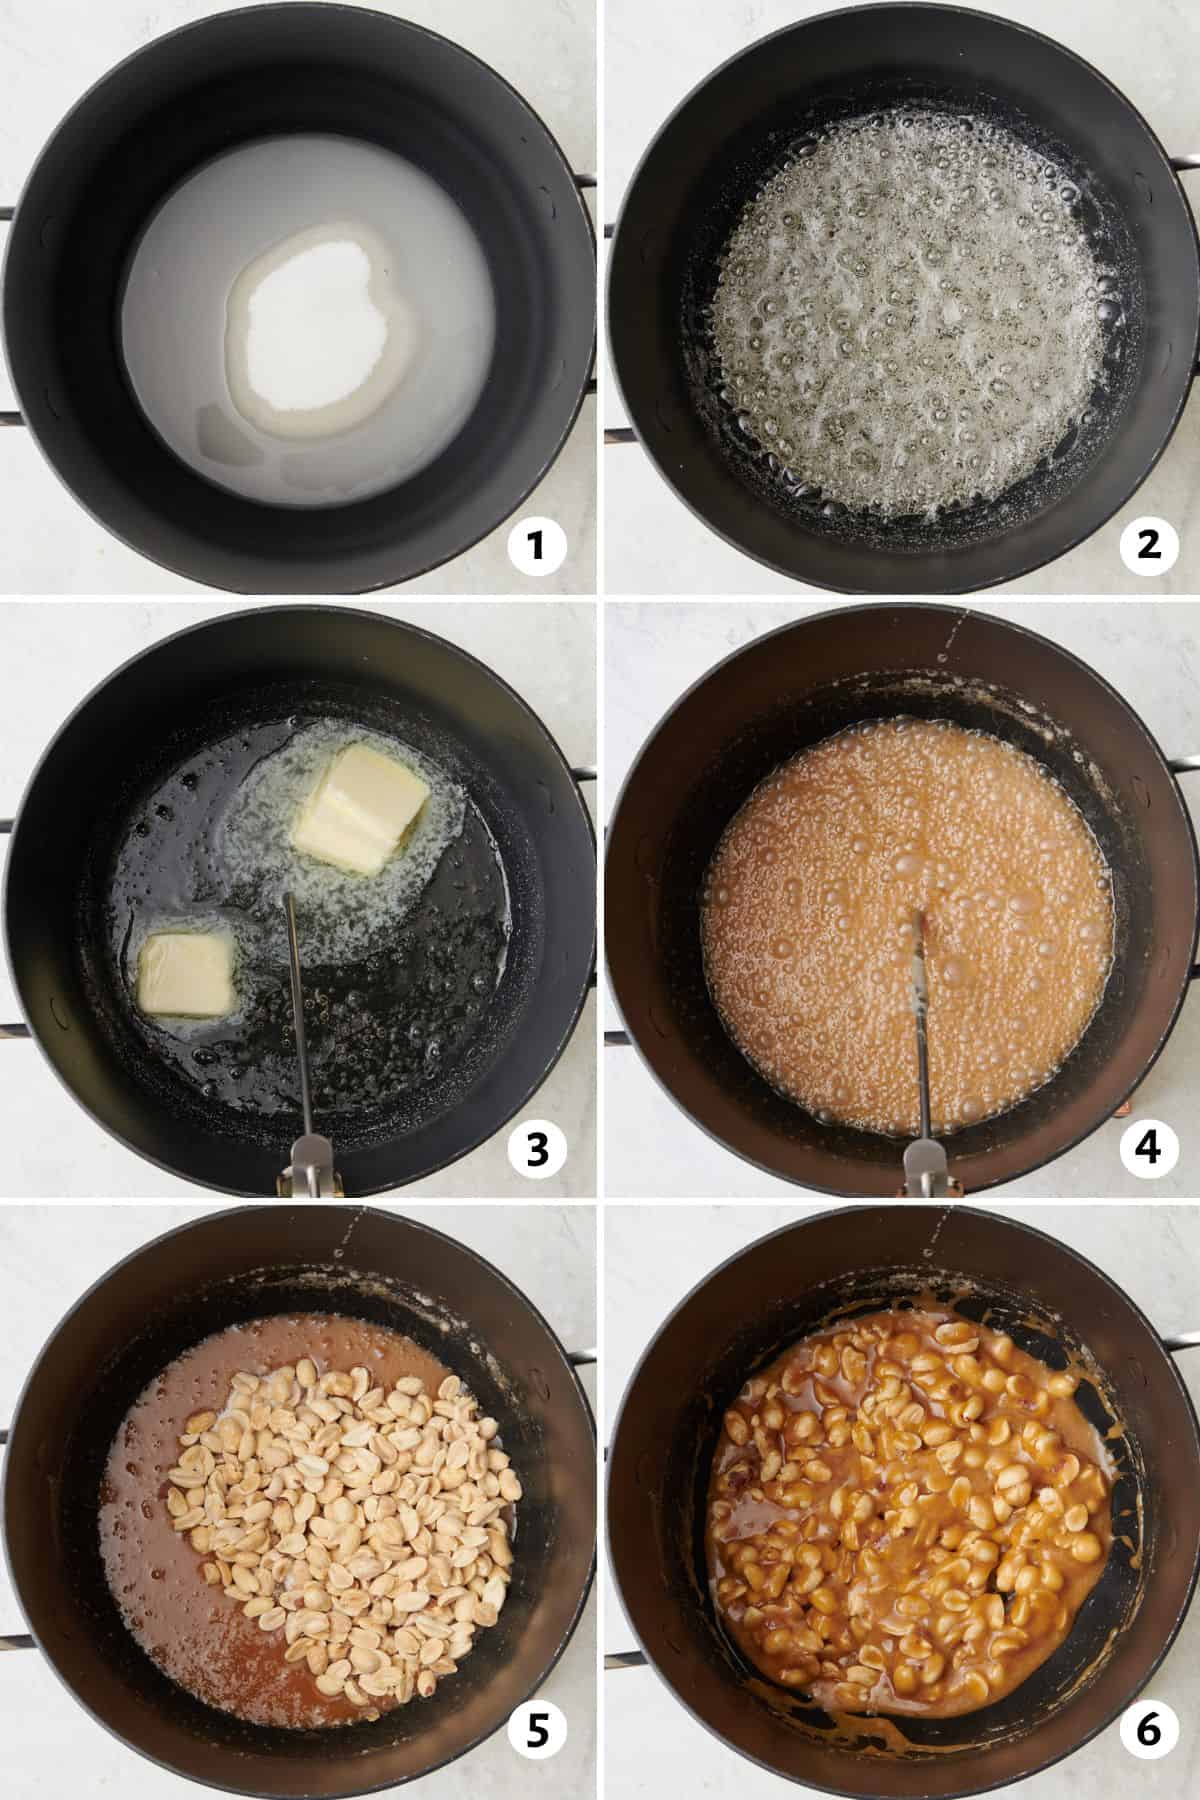 6 image collage making recipe: 1- sugar and water in a pot, 2- bringing to a boil, 3- butter added, 4- after turning a deep caramel color, 5- peanuts added, and 6- after combined.